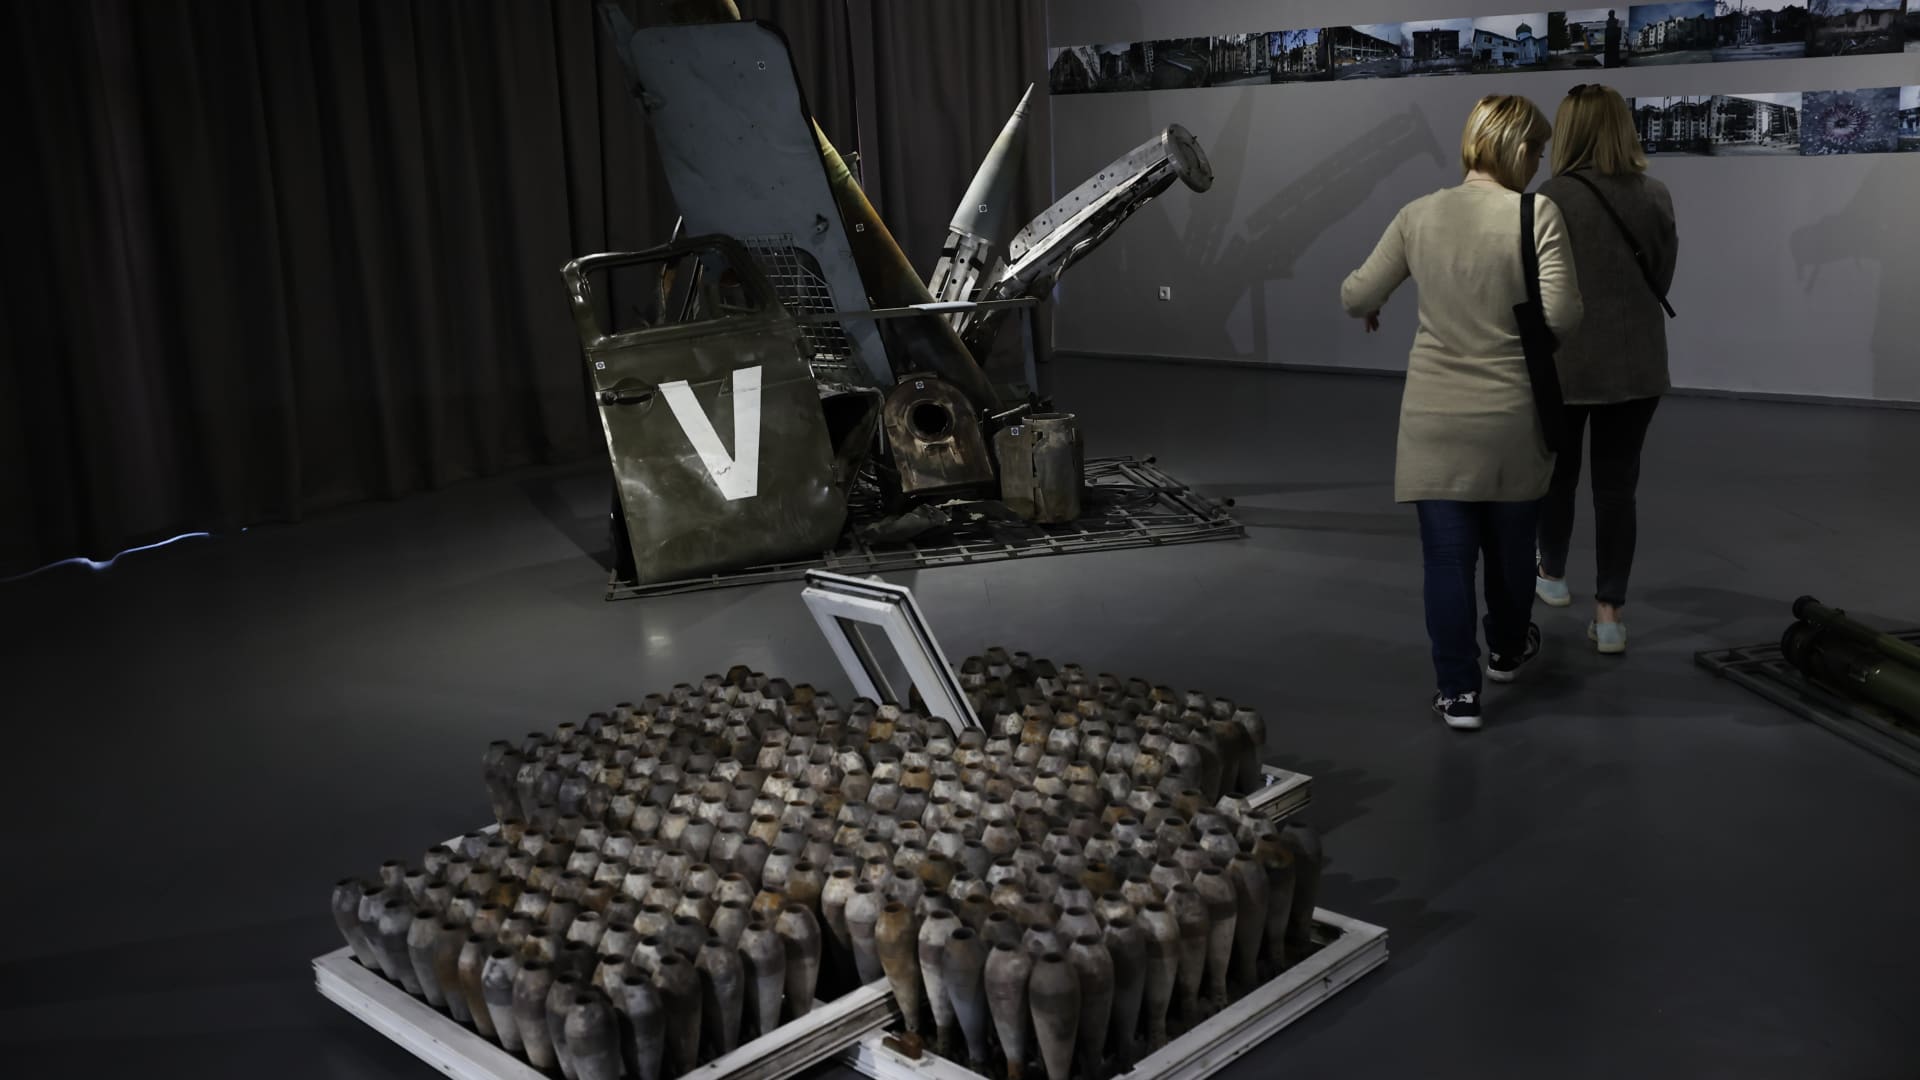 Military munitions of Russian military forces and visitors are seen at National Museum of the History of Ukraine in World War II in Kyiv, Ukraine on May 10, 2022. 